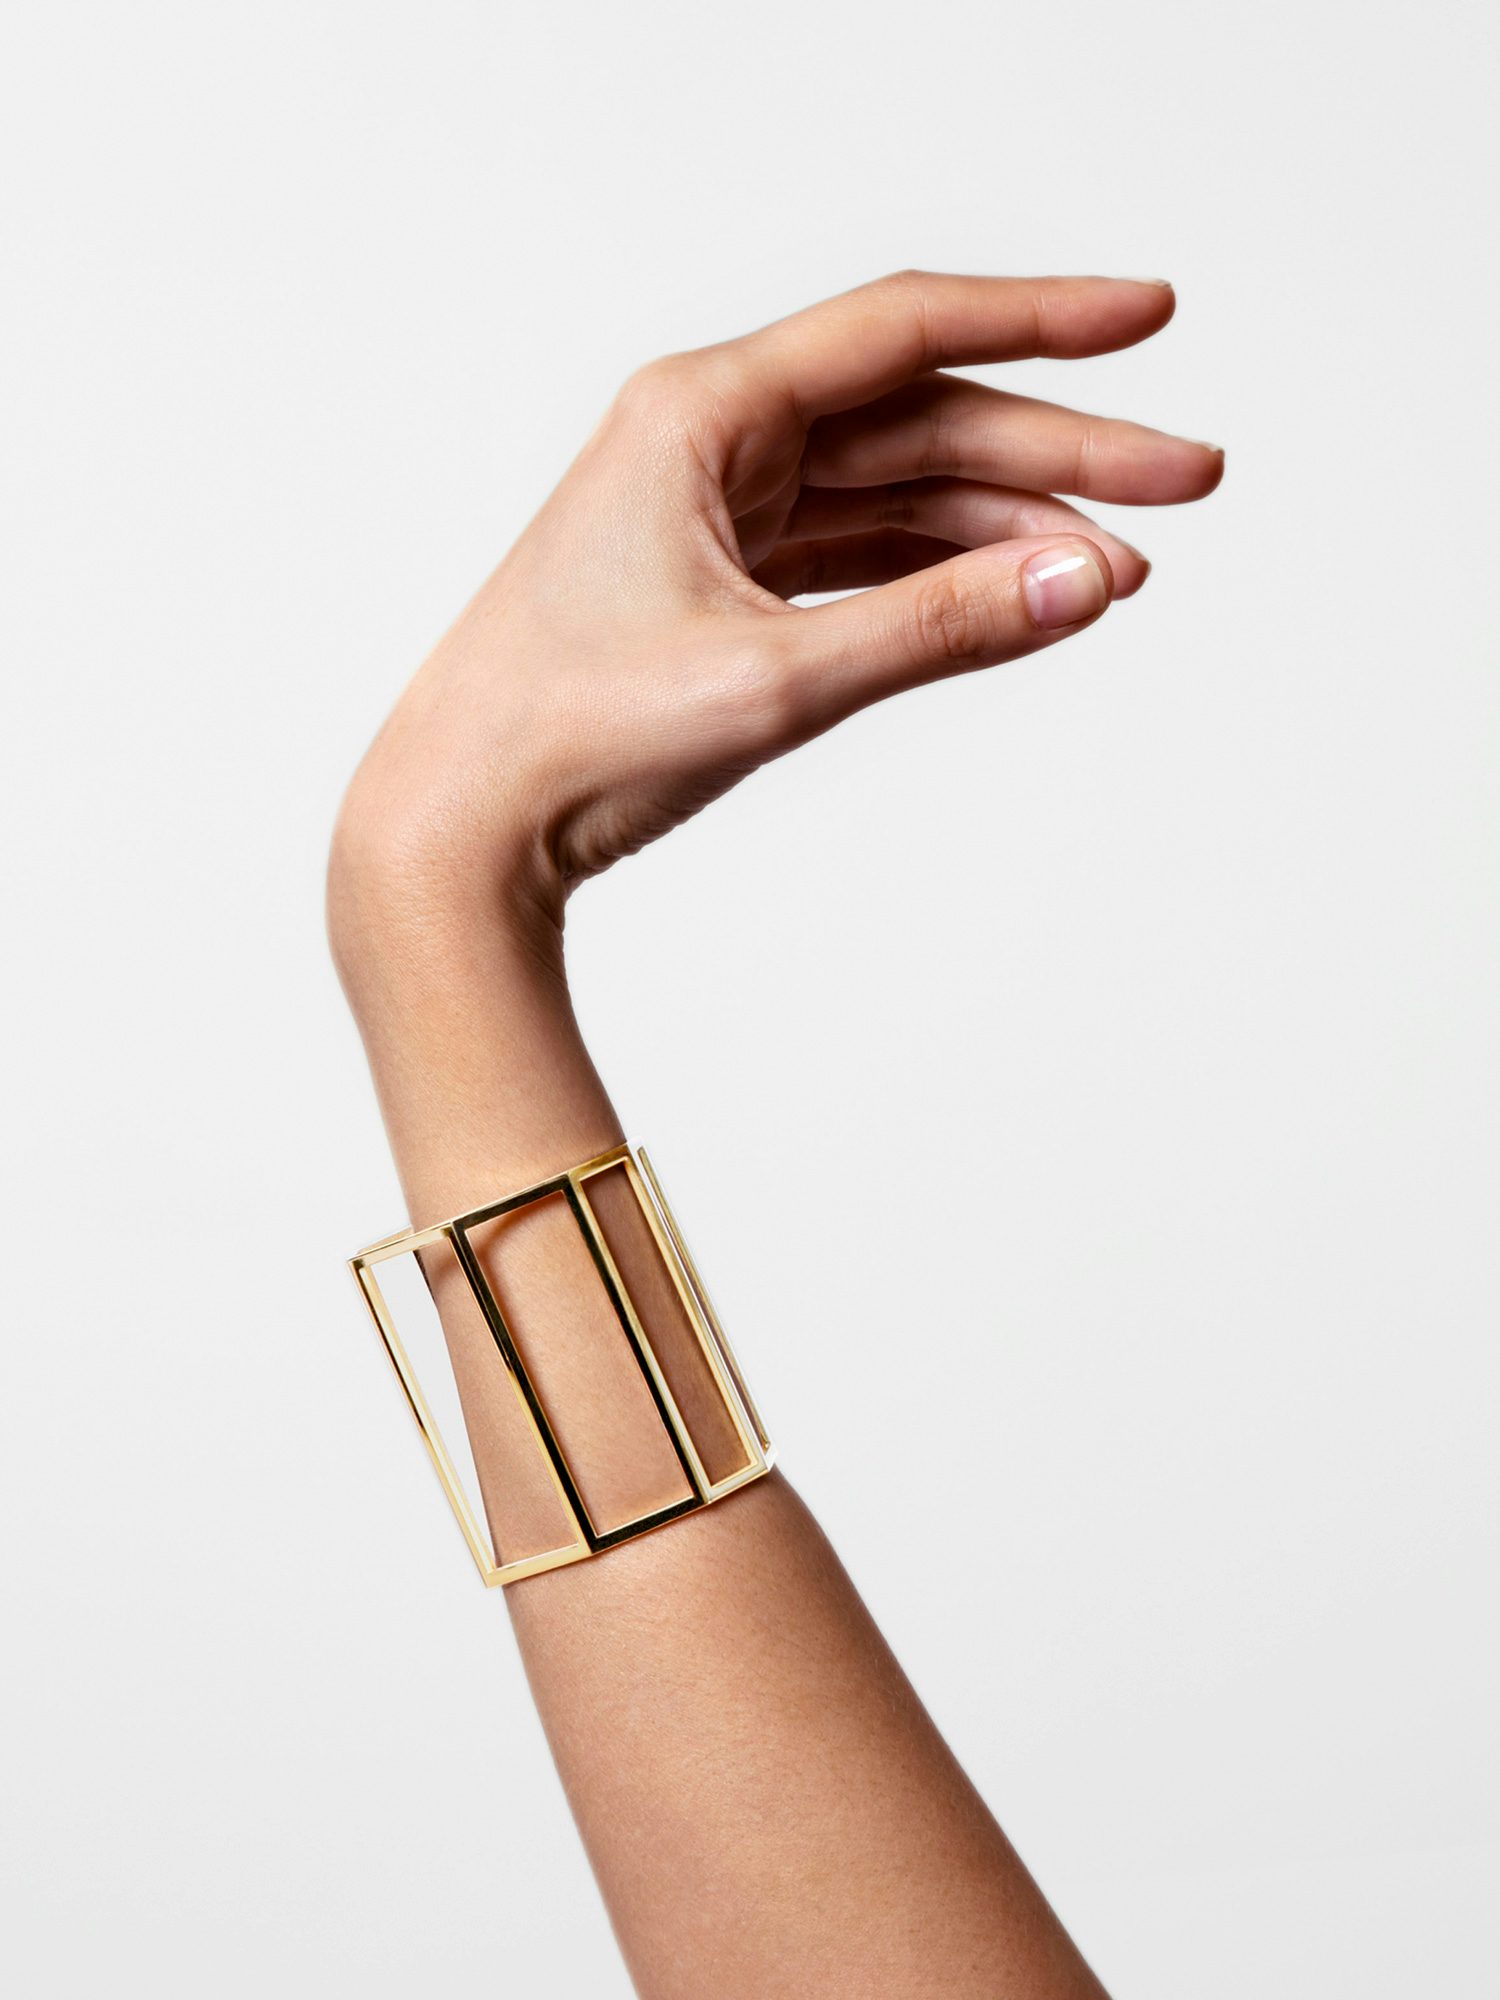 Octogone cuff in 18k Fairmined ethical yellow gold (60mm wide)